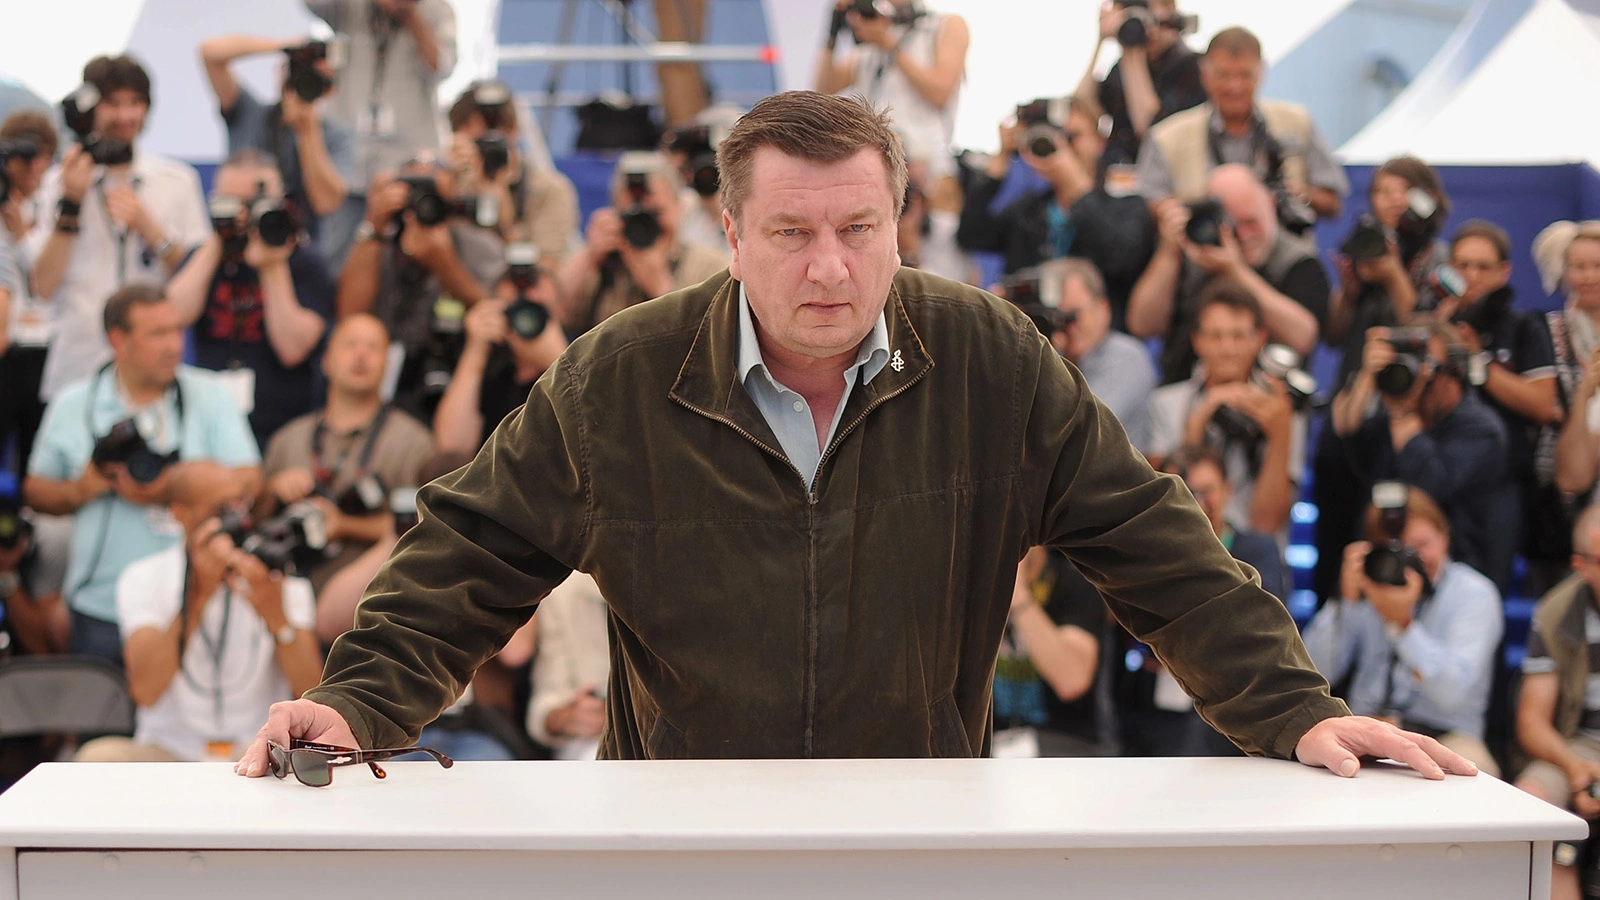 <p>CANNES, FRANCE - MAY 17: Director Aki Kaurismaki attends the &quot;Le Havre&quot; photocall at the Palais des Festivals during the 64th Cannes Film Festival on May 17, 2011 in Cannes, France.&nbsp;</p>